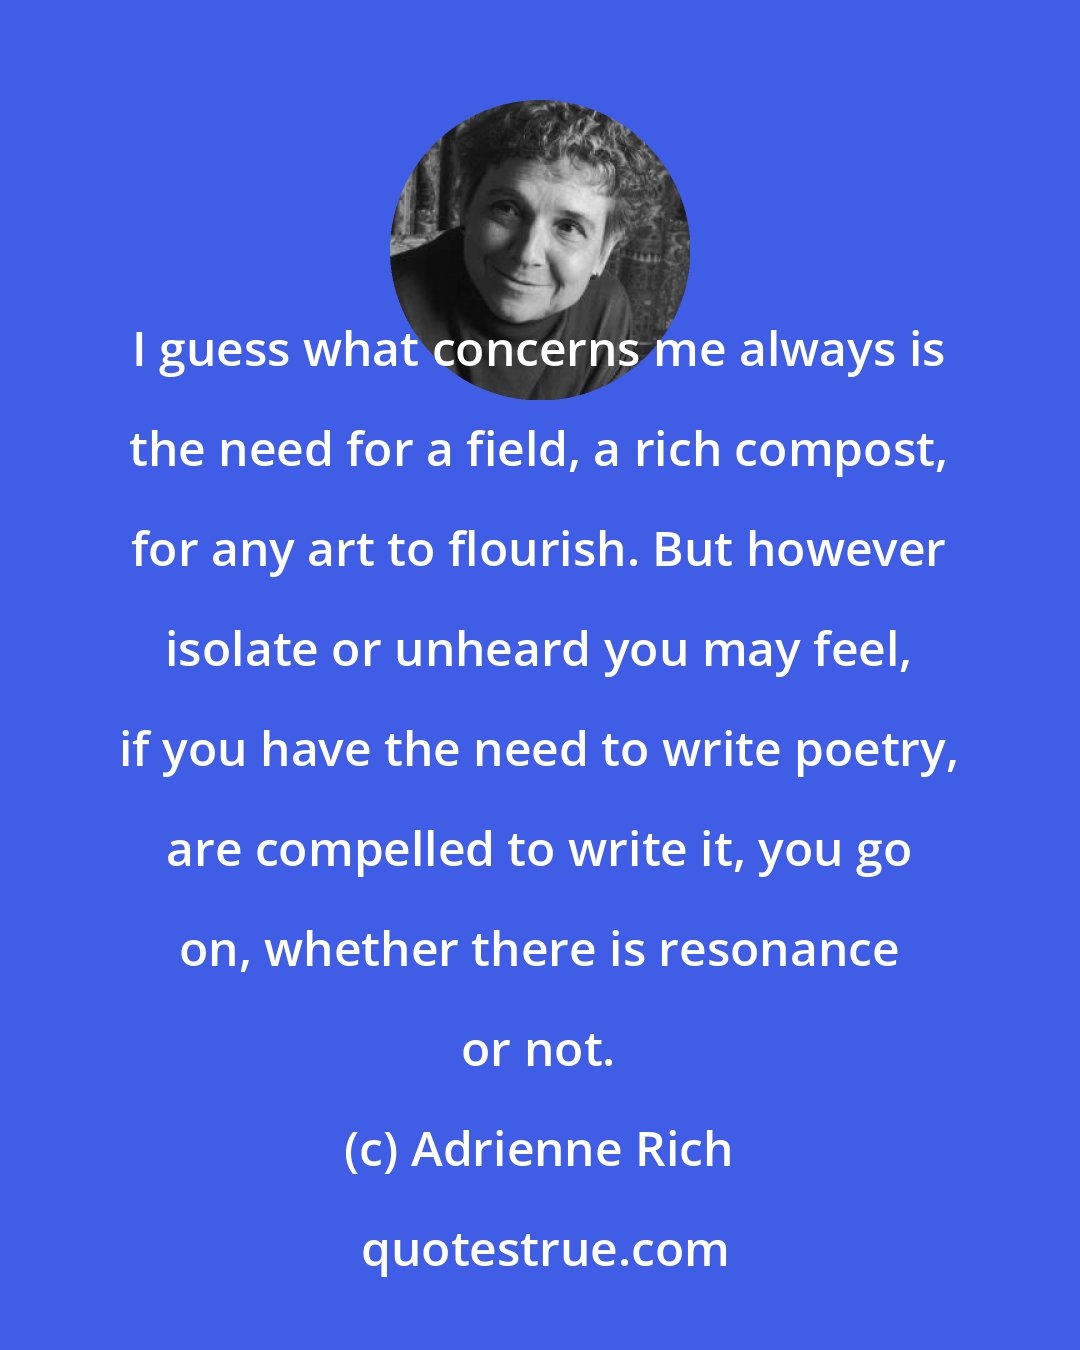 Adrienne Rich: I guess what concerns me always is the need for a field, a rich compost, for any art to flourish. But however isolate or unheard you may feel, if you have the need to write poetry, are compelled to write it, you go on, whether there is resonance or not.